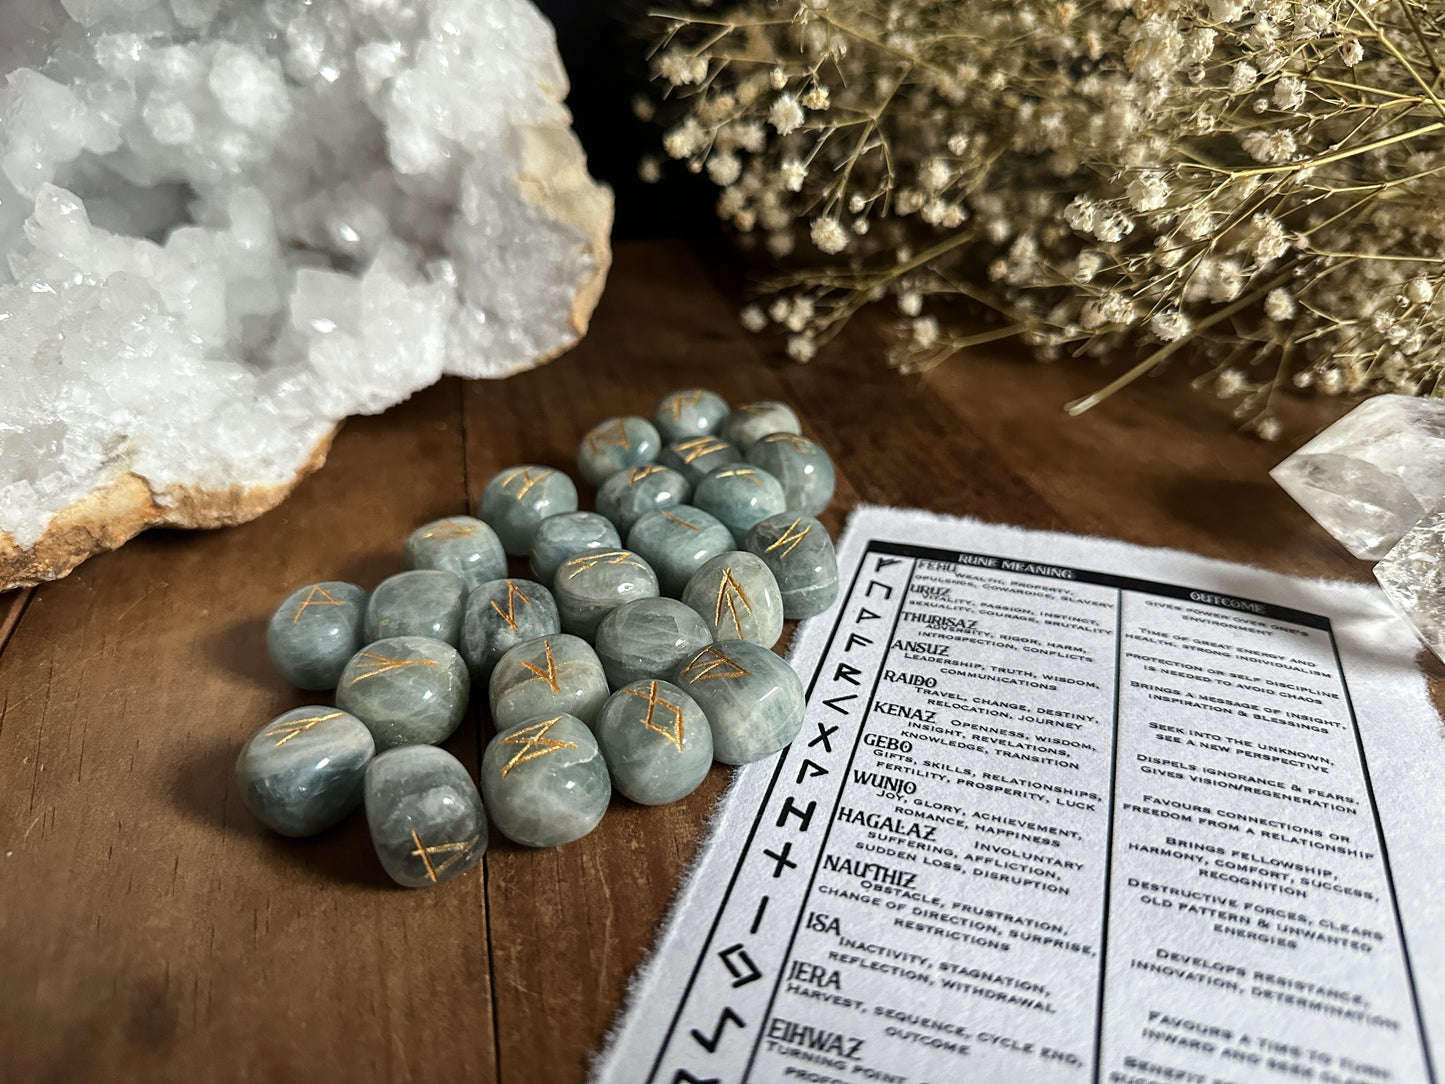 Aquamarine Rune set, each stone delicately carved with runic symbols, perfect for divination and spiritual practice